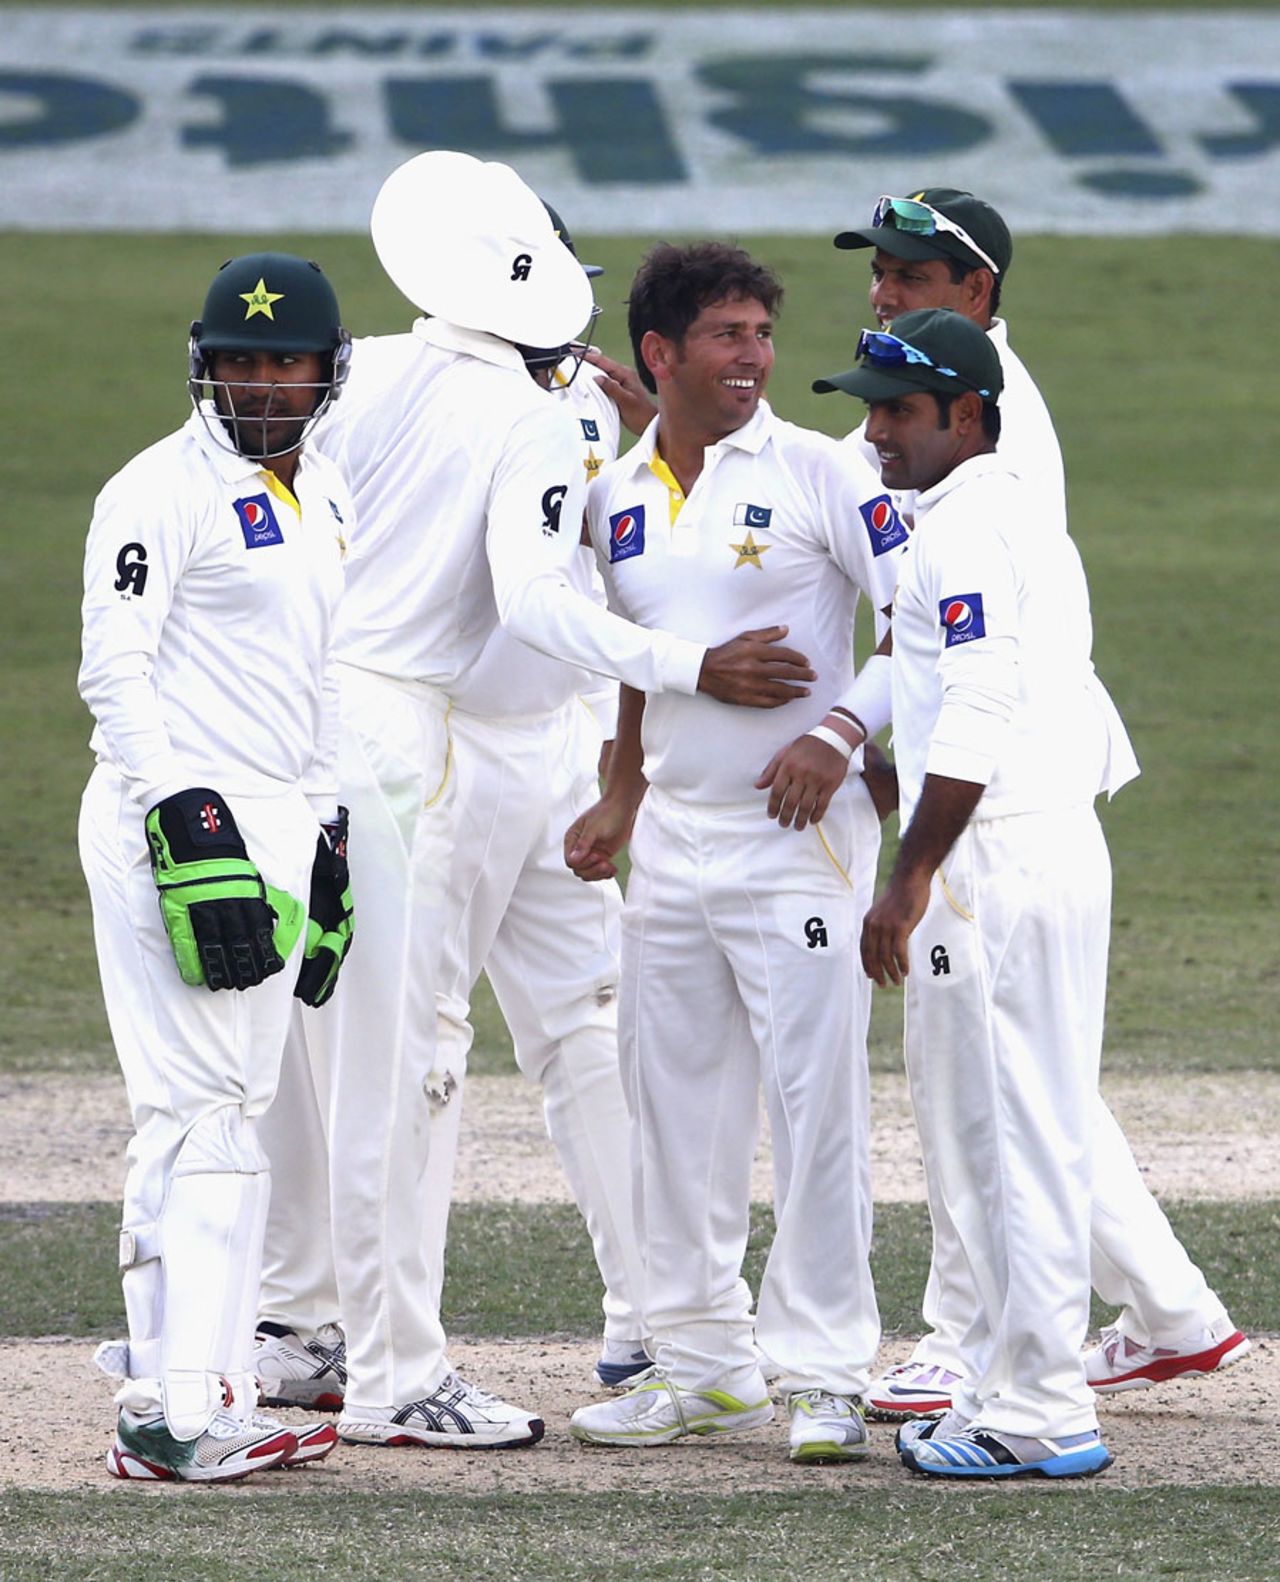 Yasir Shah is congratulated after a wicket, Pakistan v New Zealand, 2nd Test, Dubai, 4th day, November 20, 2014